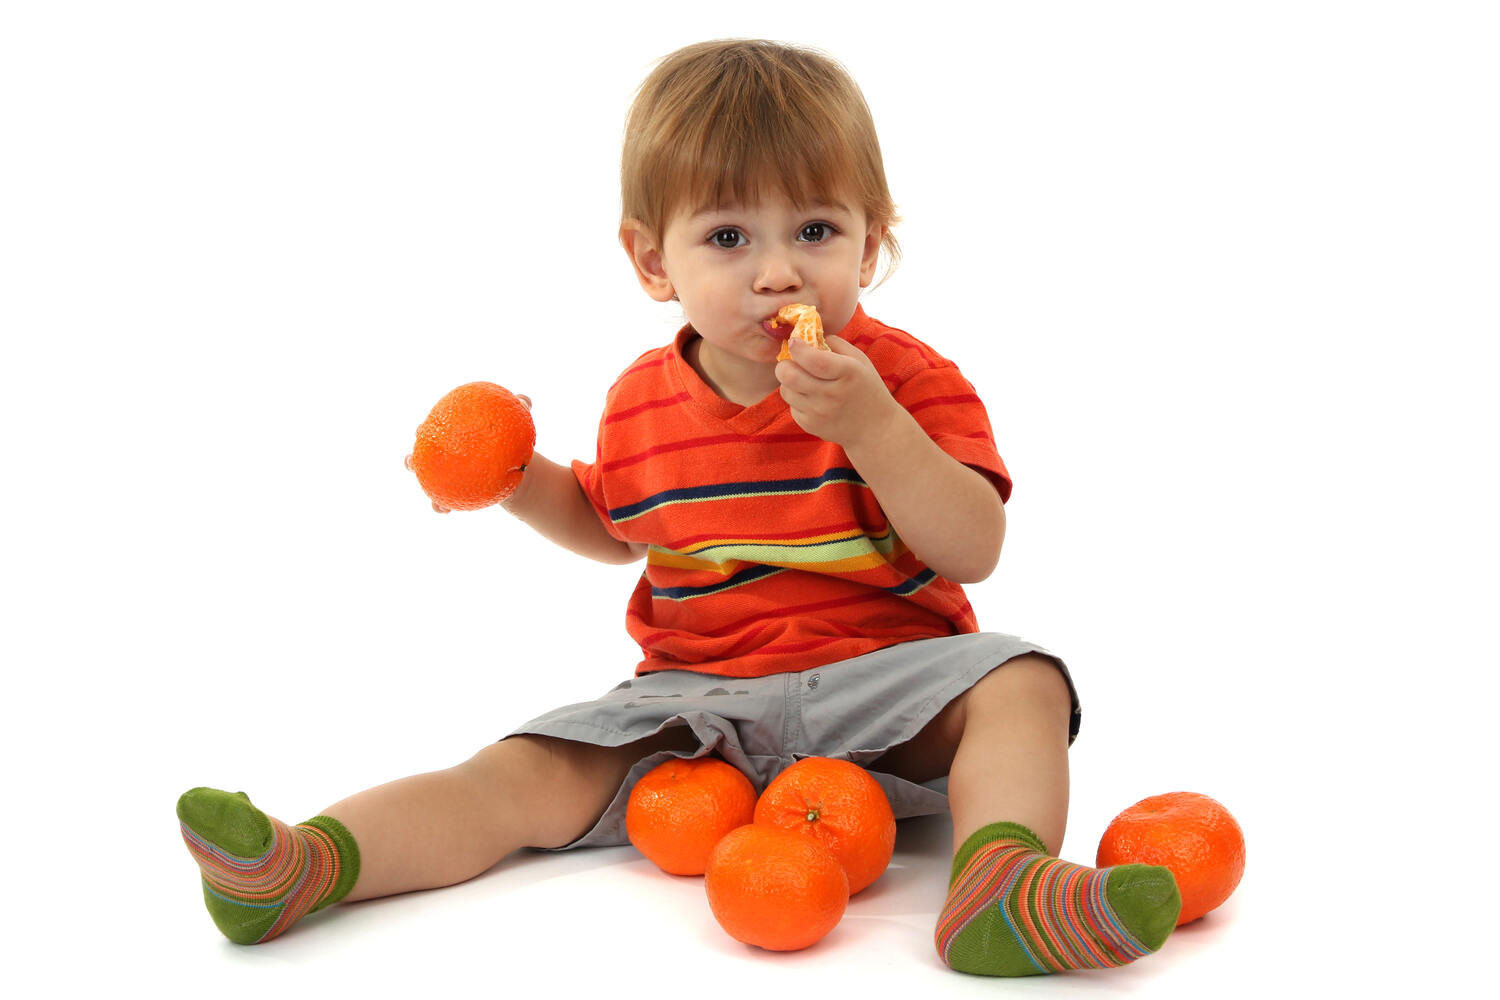 Citrus fruits boost immunity in toddlers